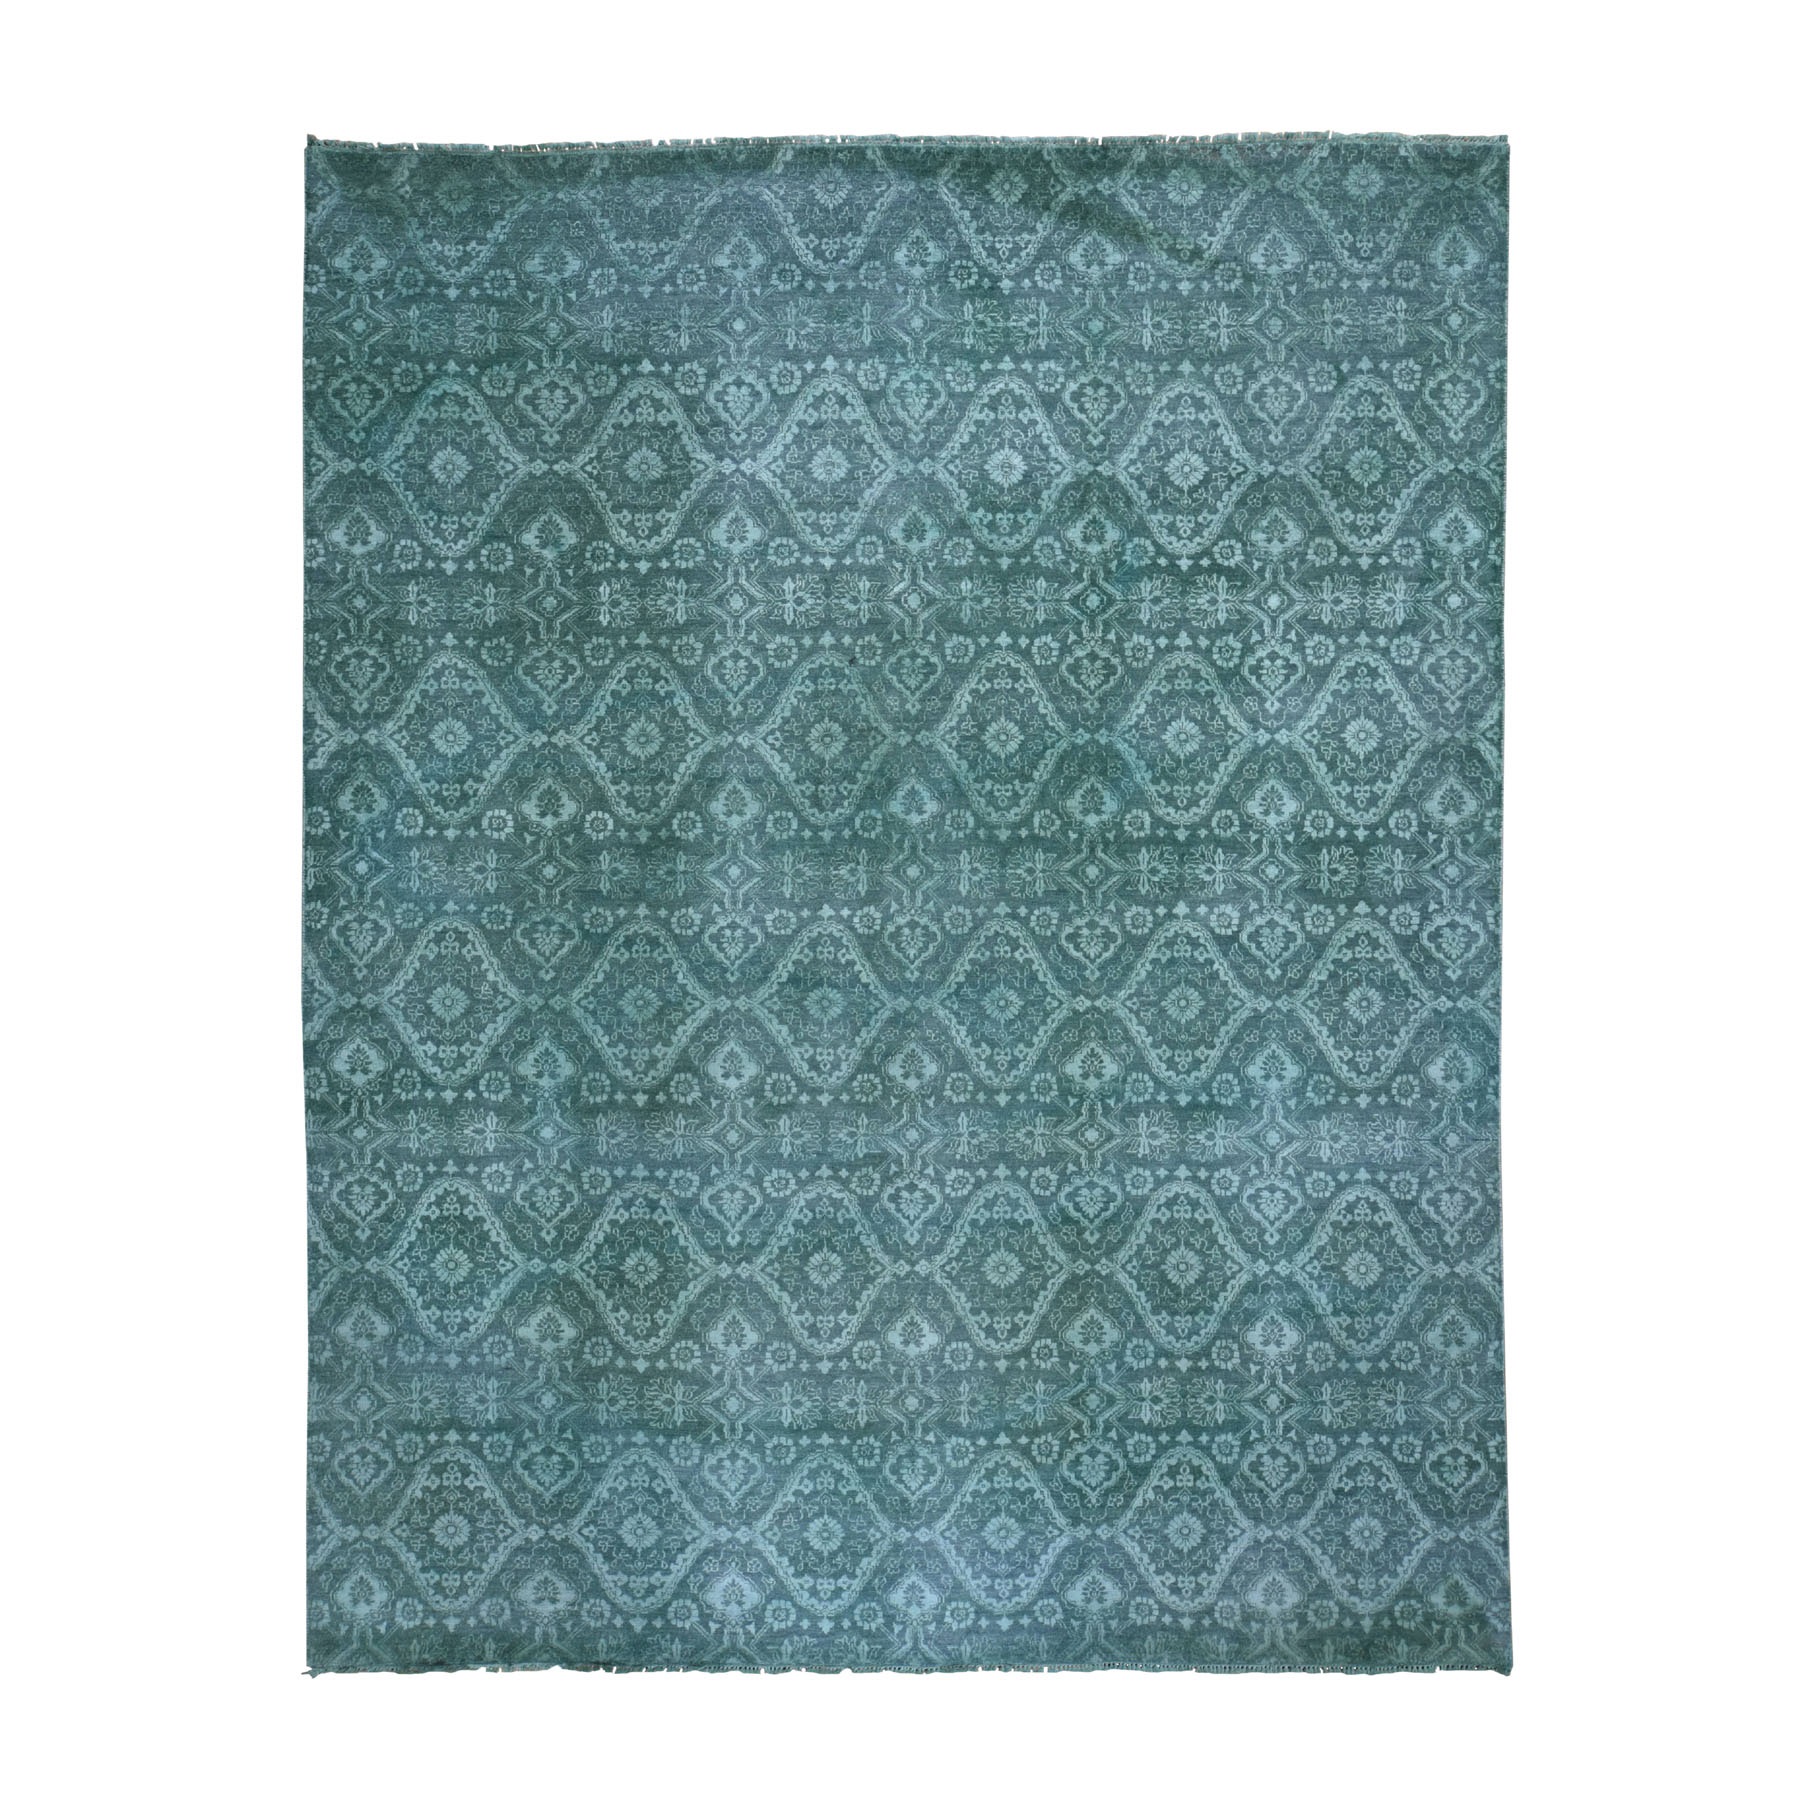 8'x10'1" Teal Green Overdyed Wool And Silk Hand Woven Oriental Rug 